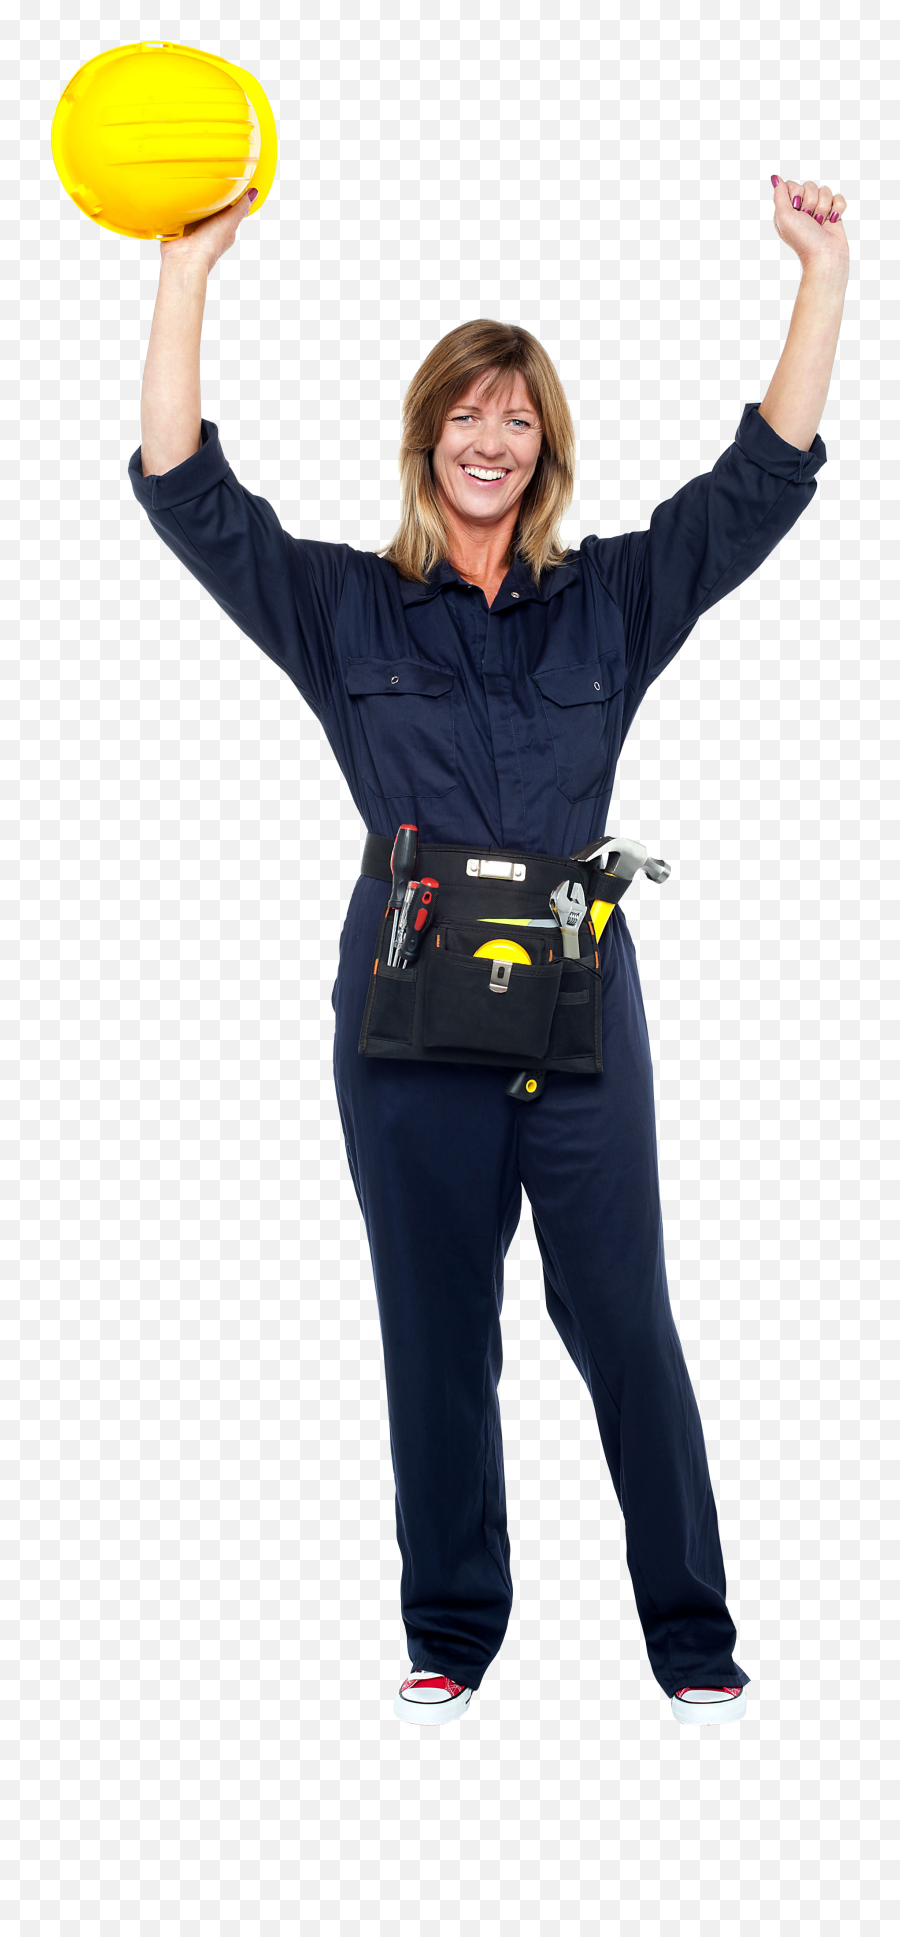 Happy And Equipped Worker Png Image - Portable Network Graphics,Worker Png